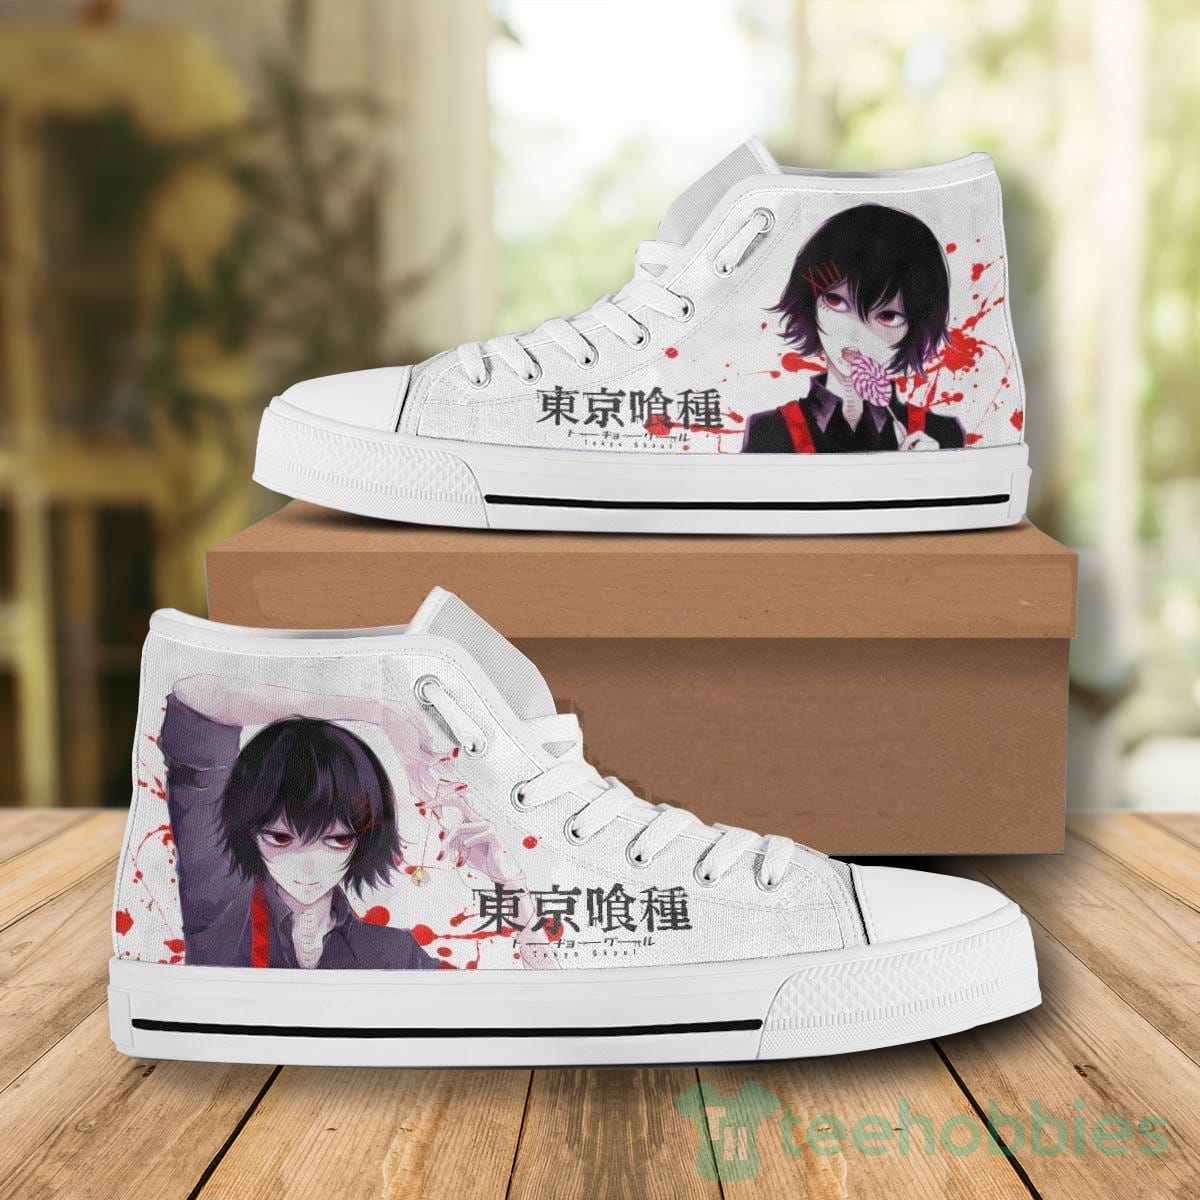 Juuzou Tokyo Ghoul All Star High Top Canvas Shoes